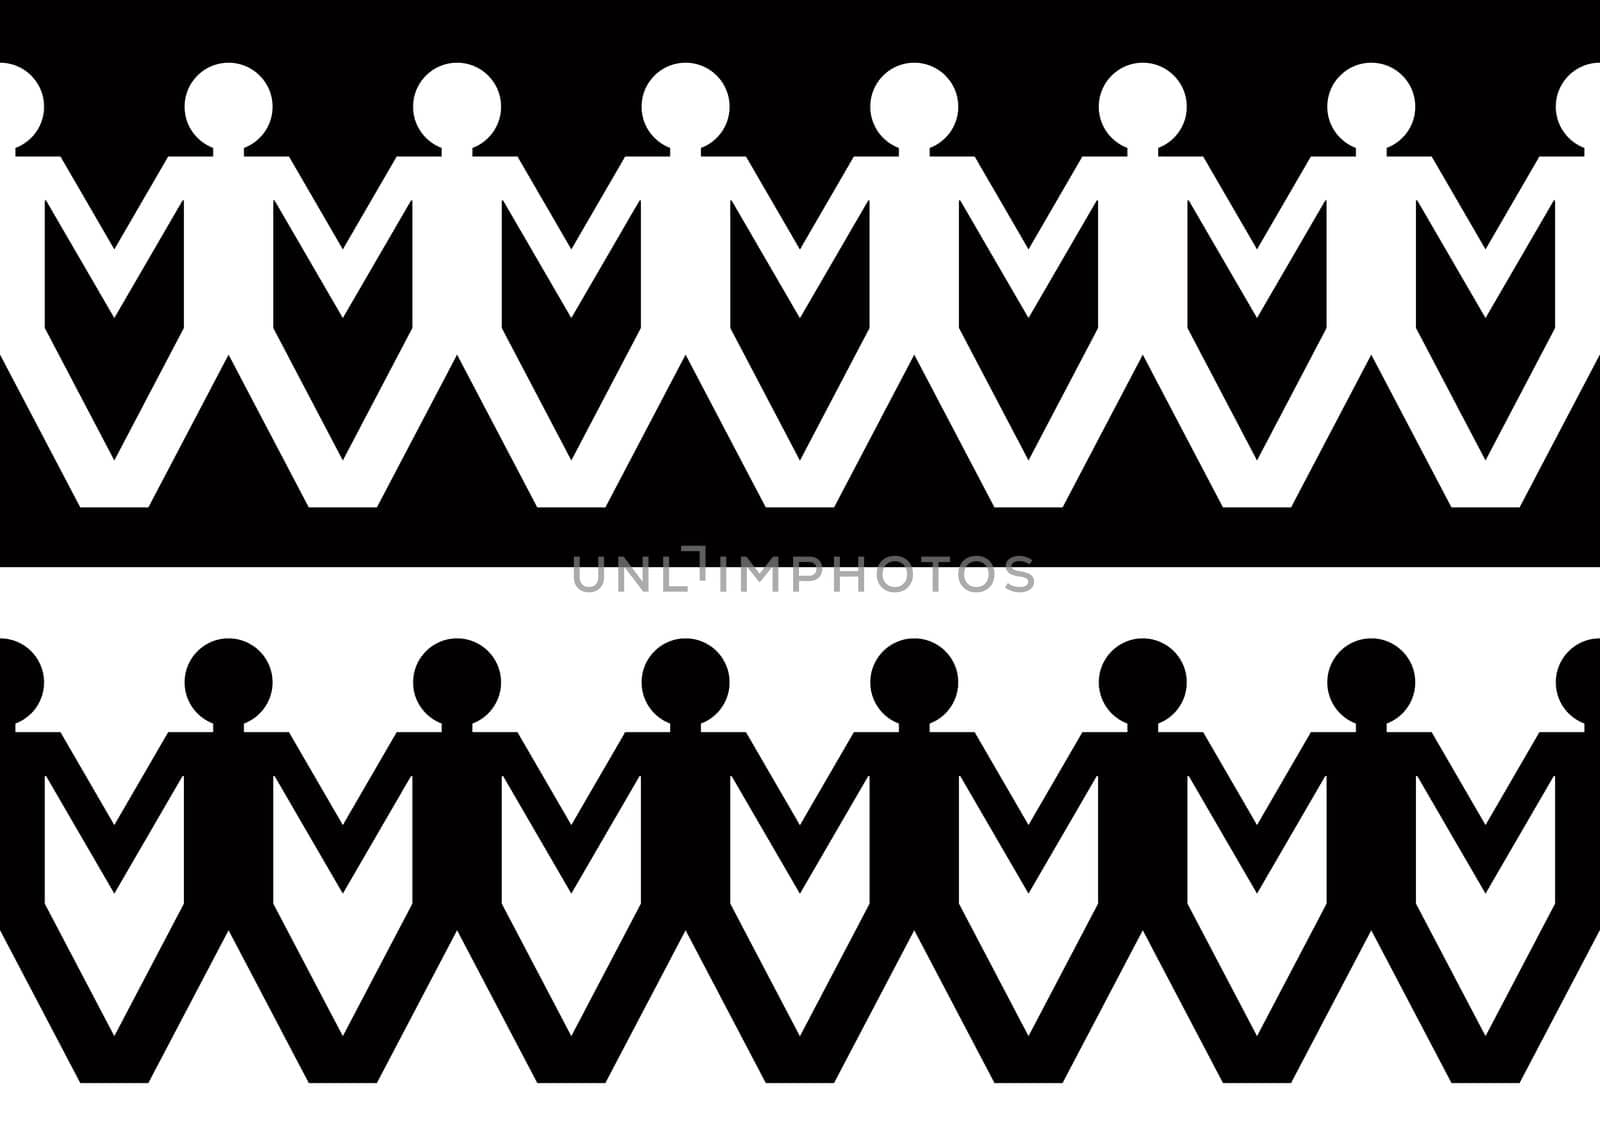 String of paper chain men in black and white ideal border holding hands